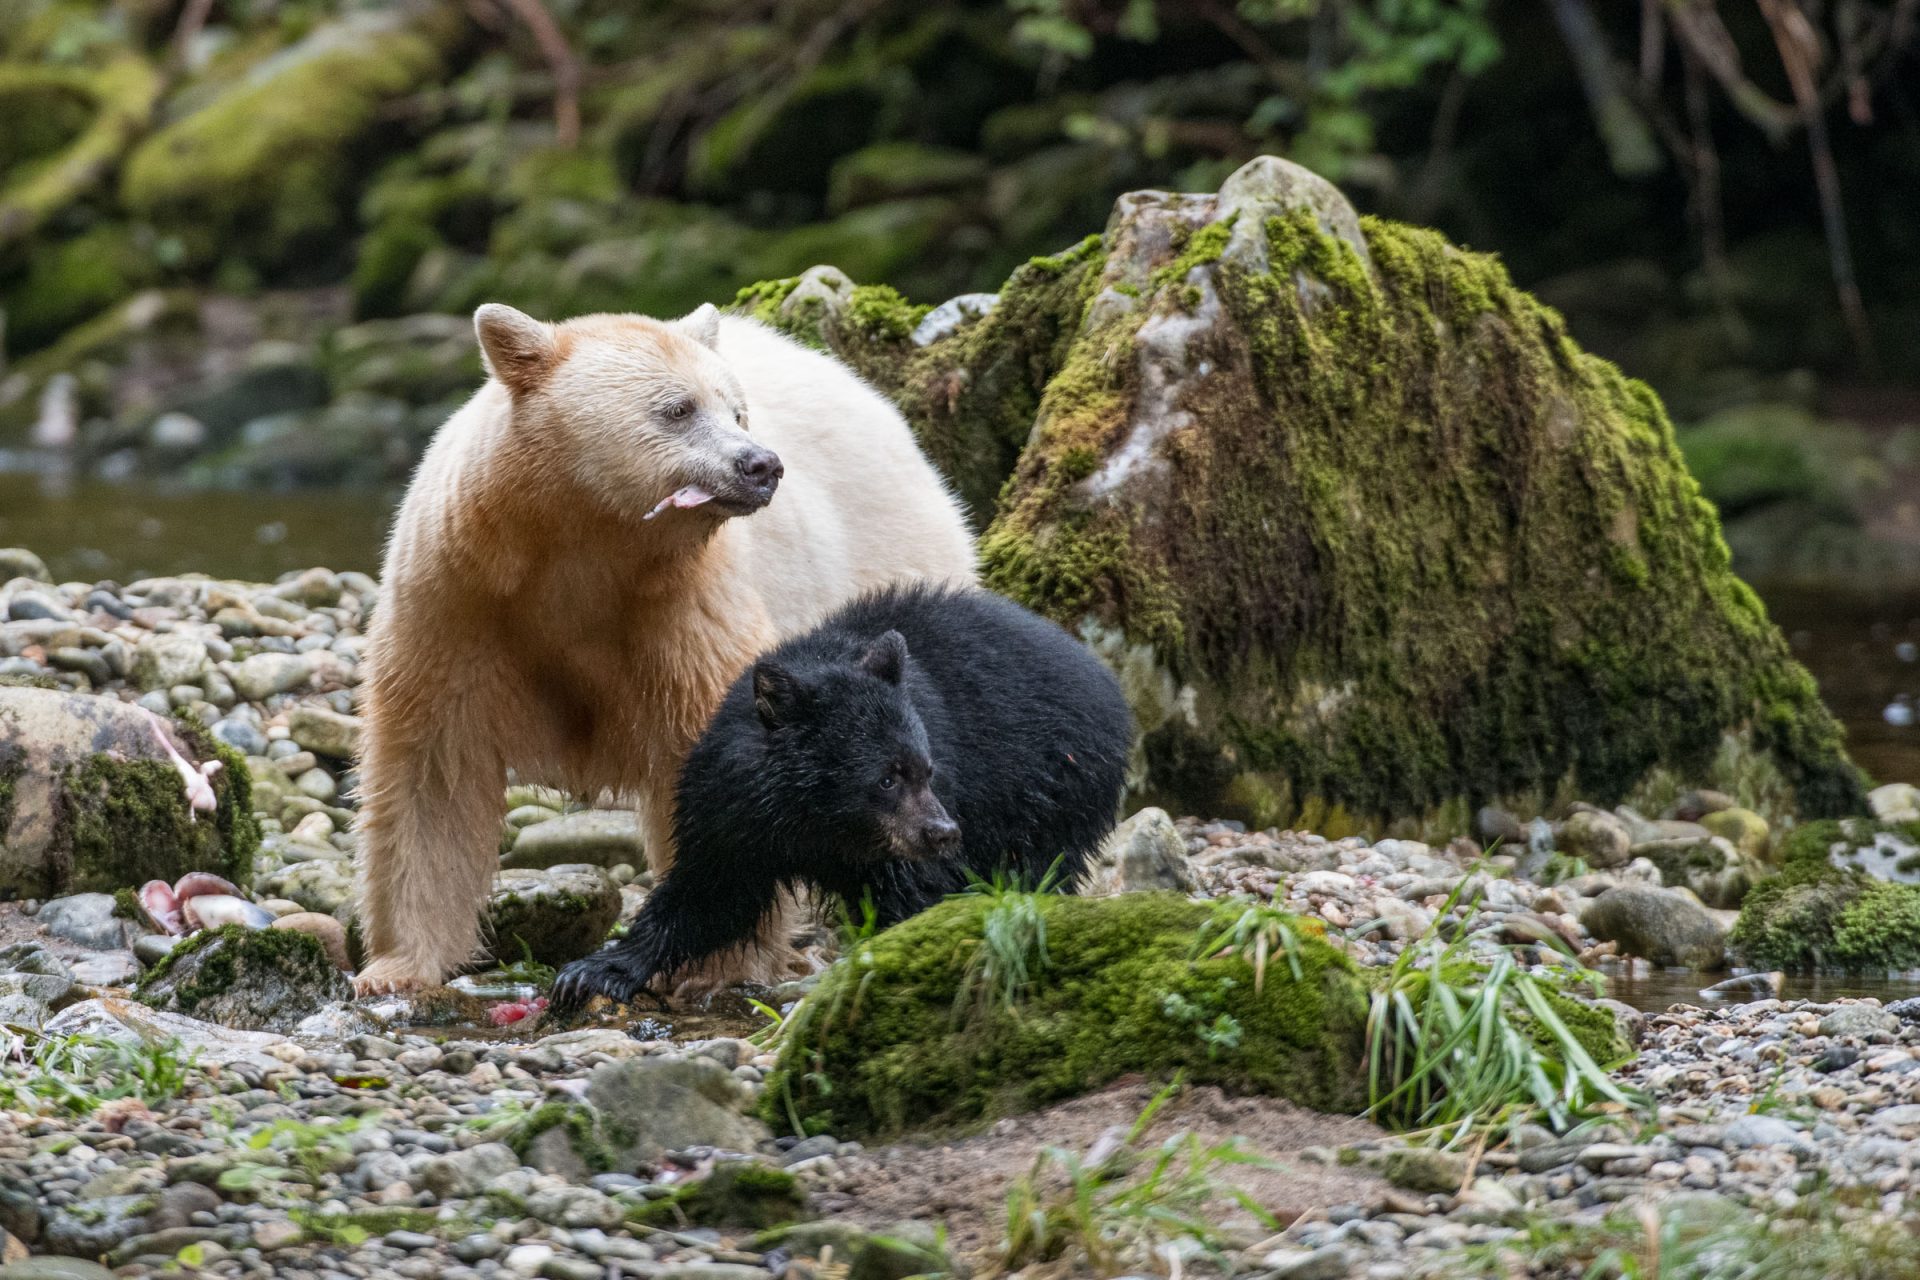 A female spirit, or kermode bear (Ursus americanus kermodei), known as "Strawberry," feeds scraps of fish to her cub, "Blackberry," near a salmon spanwing river. Researchers have confirmed that two bears with black coats can produce a white-coated cub if both mother and father have a recessive trait for Kermodism. Kermodism is produced by a recessive mutation at the MC1R gene and this white fur phenotype occurs only in approximately 1 of 40 to 100 black bears on the BC coast. Great Bear Rainforest, British Columbia, Canada.